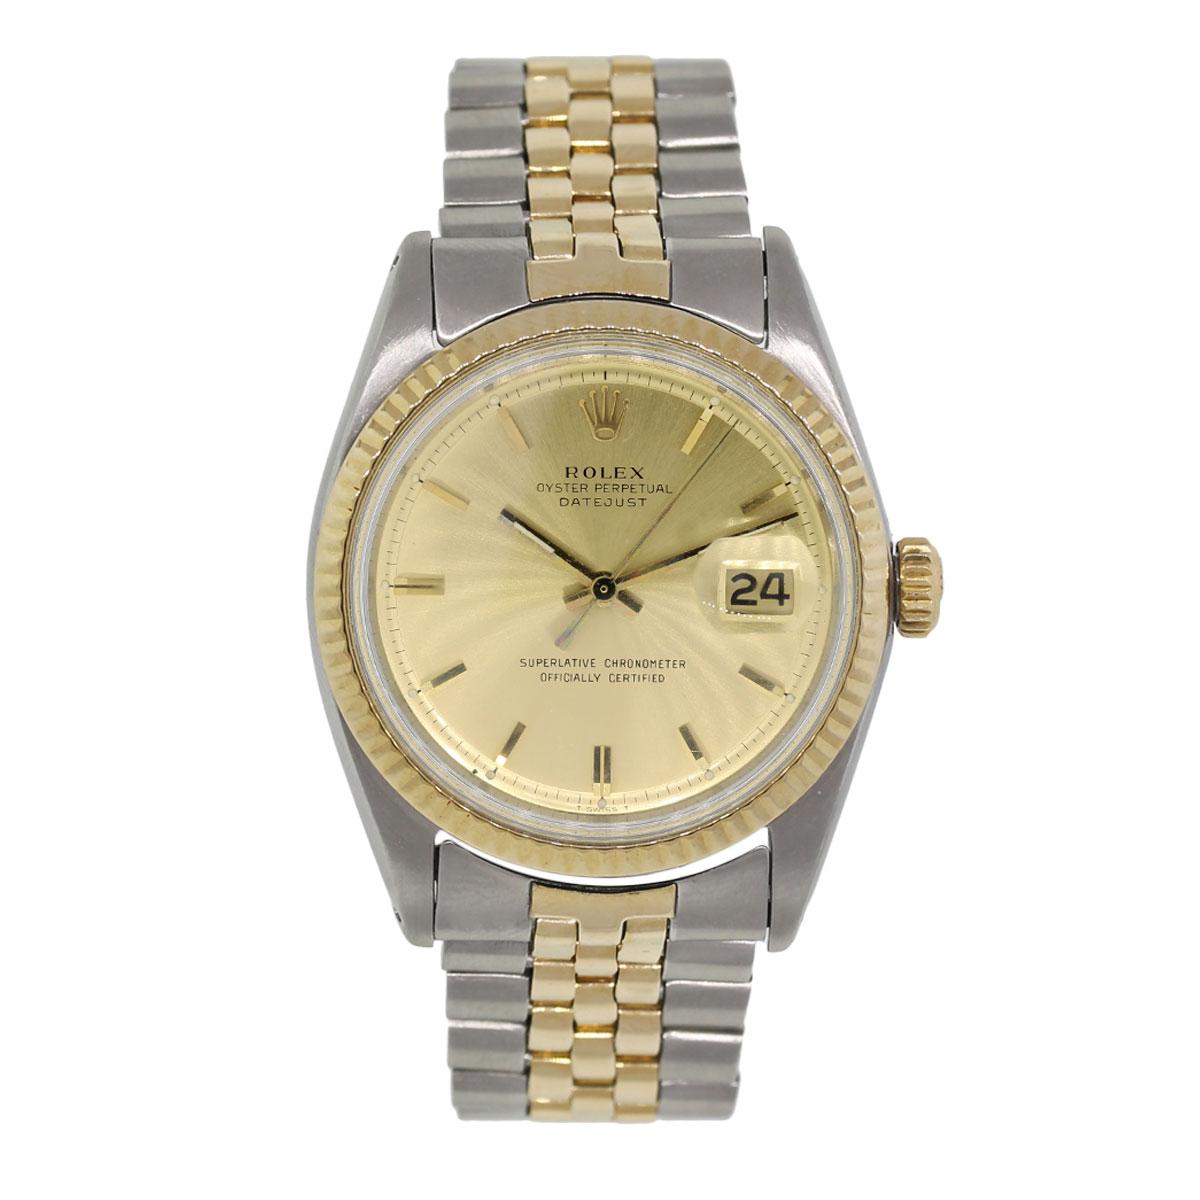 Brand: Rolex
MPN: 1601
Model: Datejust
Case Material: Stainless Steel
Case Diameter: 36mm
Crystal: Plastic crystal
Bezel: 18k yellow gold fluted bezel
Dial: Champagne pie pan dial with date window at the 3 o’clock position
Bracelet: 18k yellow gold